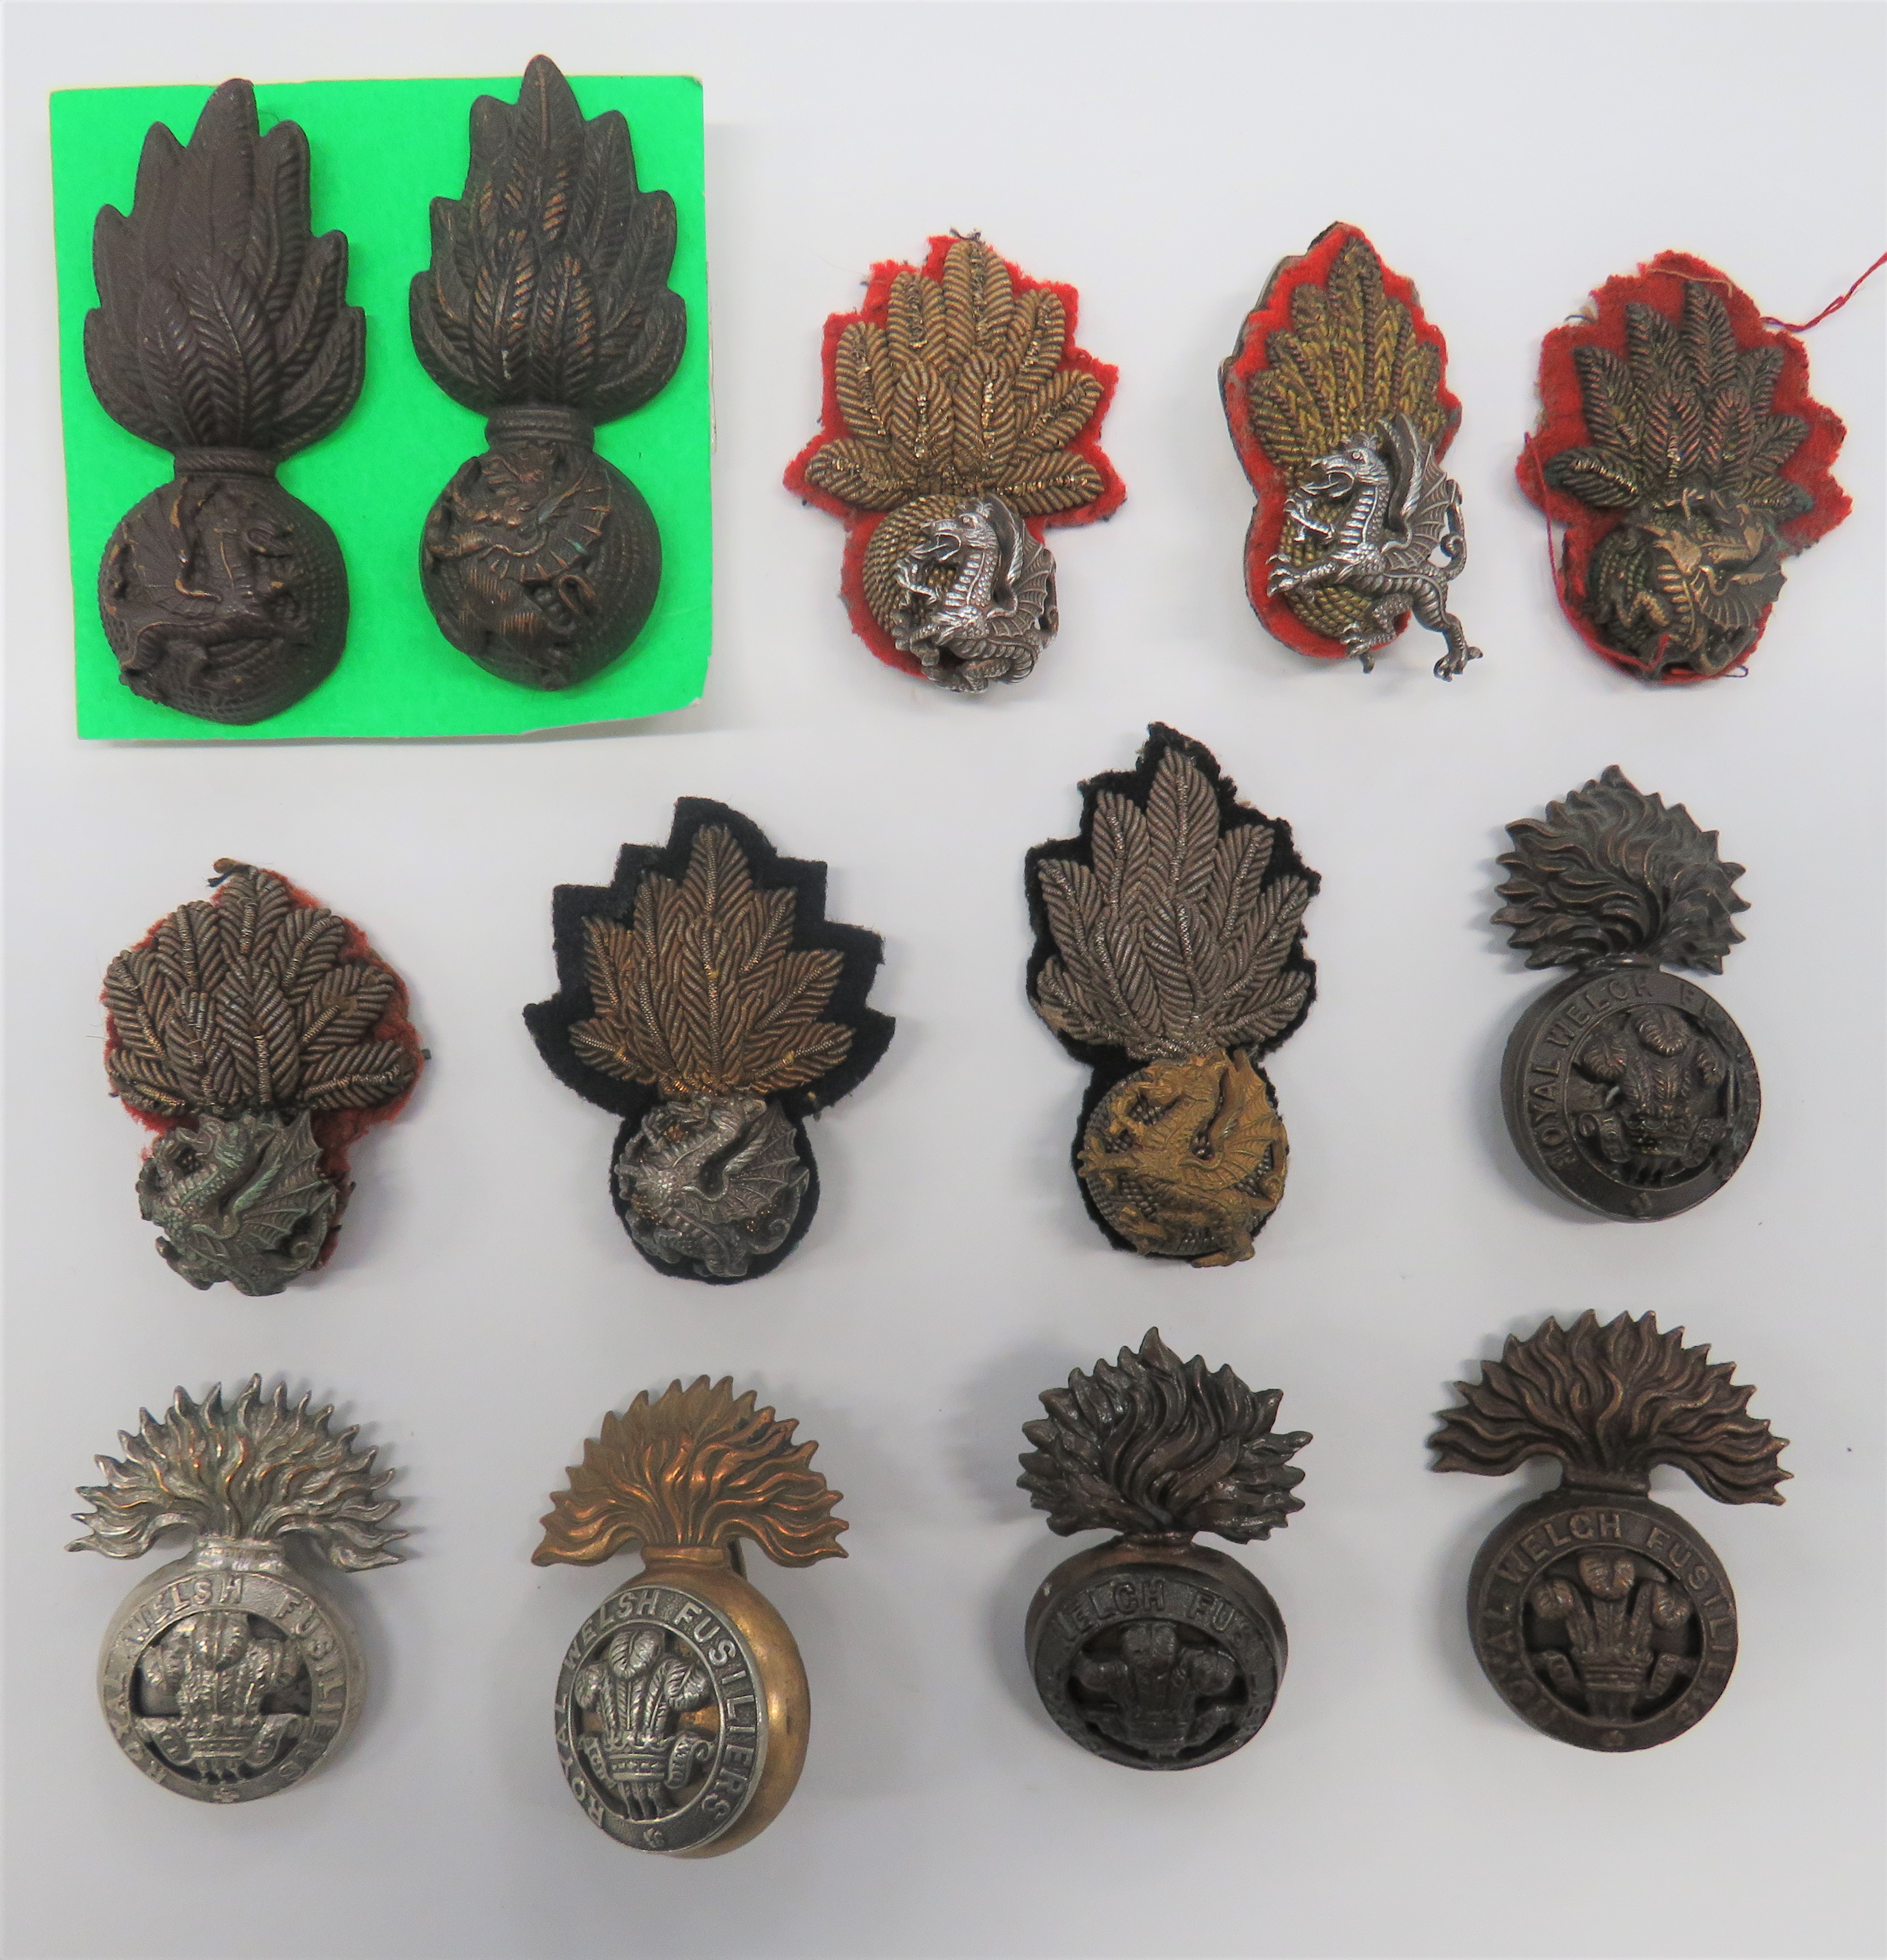 Royal Welsh Fusiliers Officer Badges including bullion embroidery and silvered dragon set on a